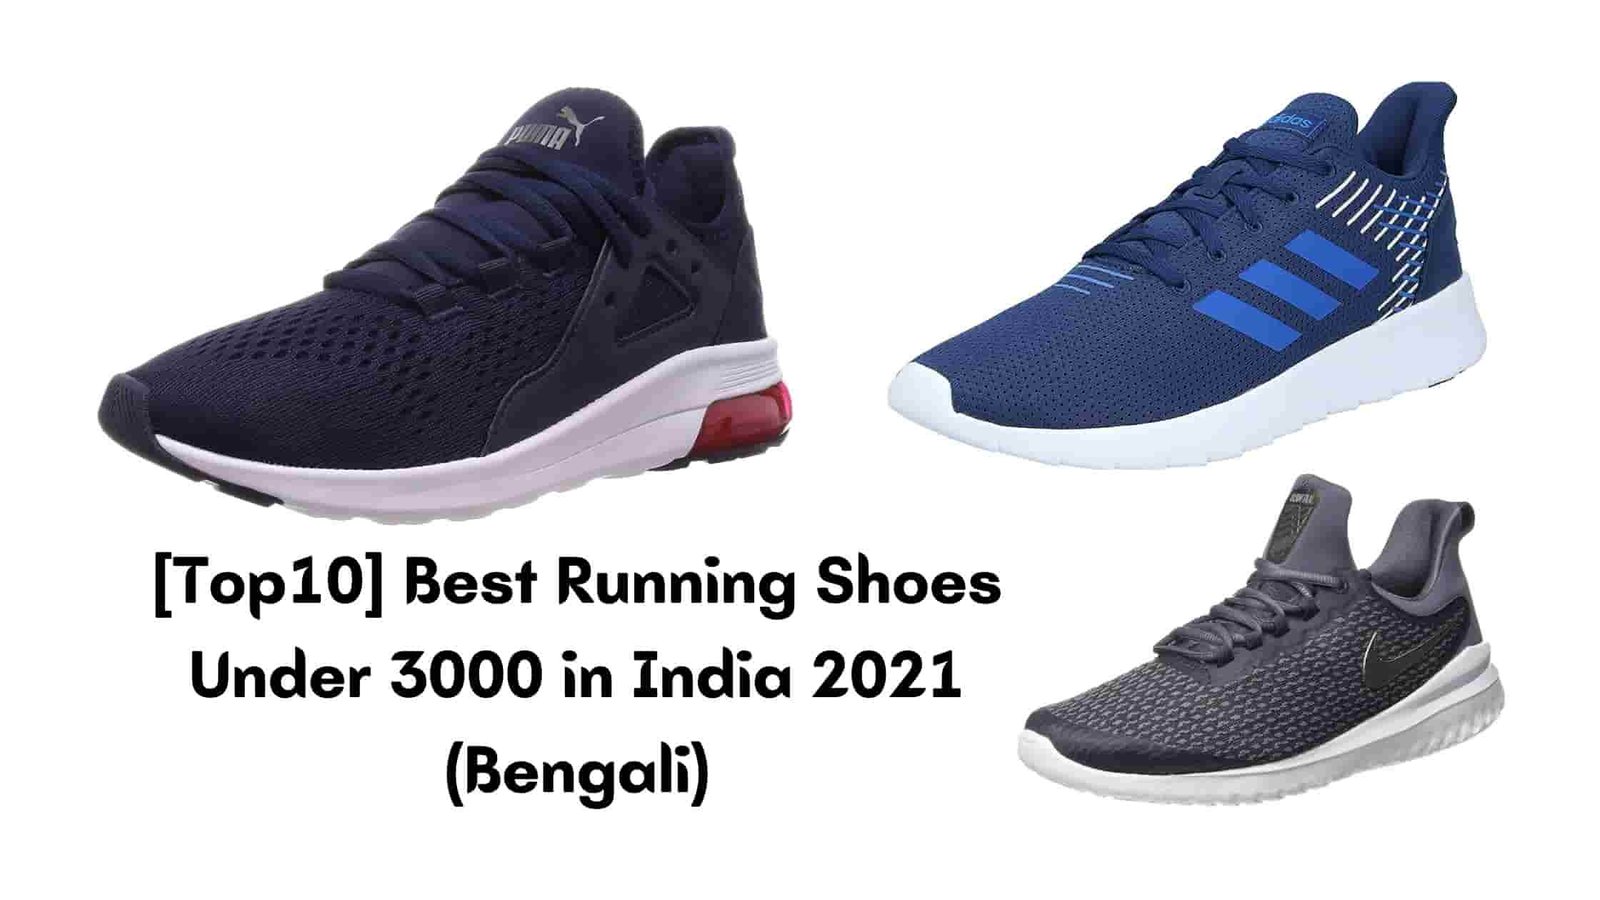 [Top10] Best Running Shoes Under 3000 in India 2021 (Bengali)